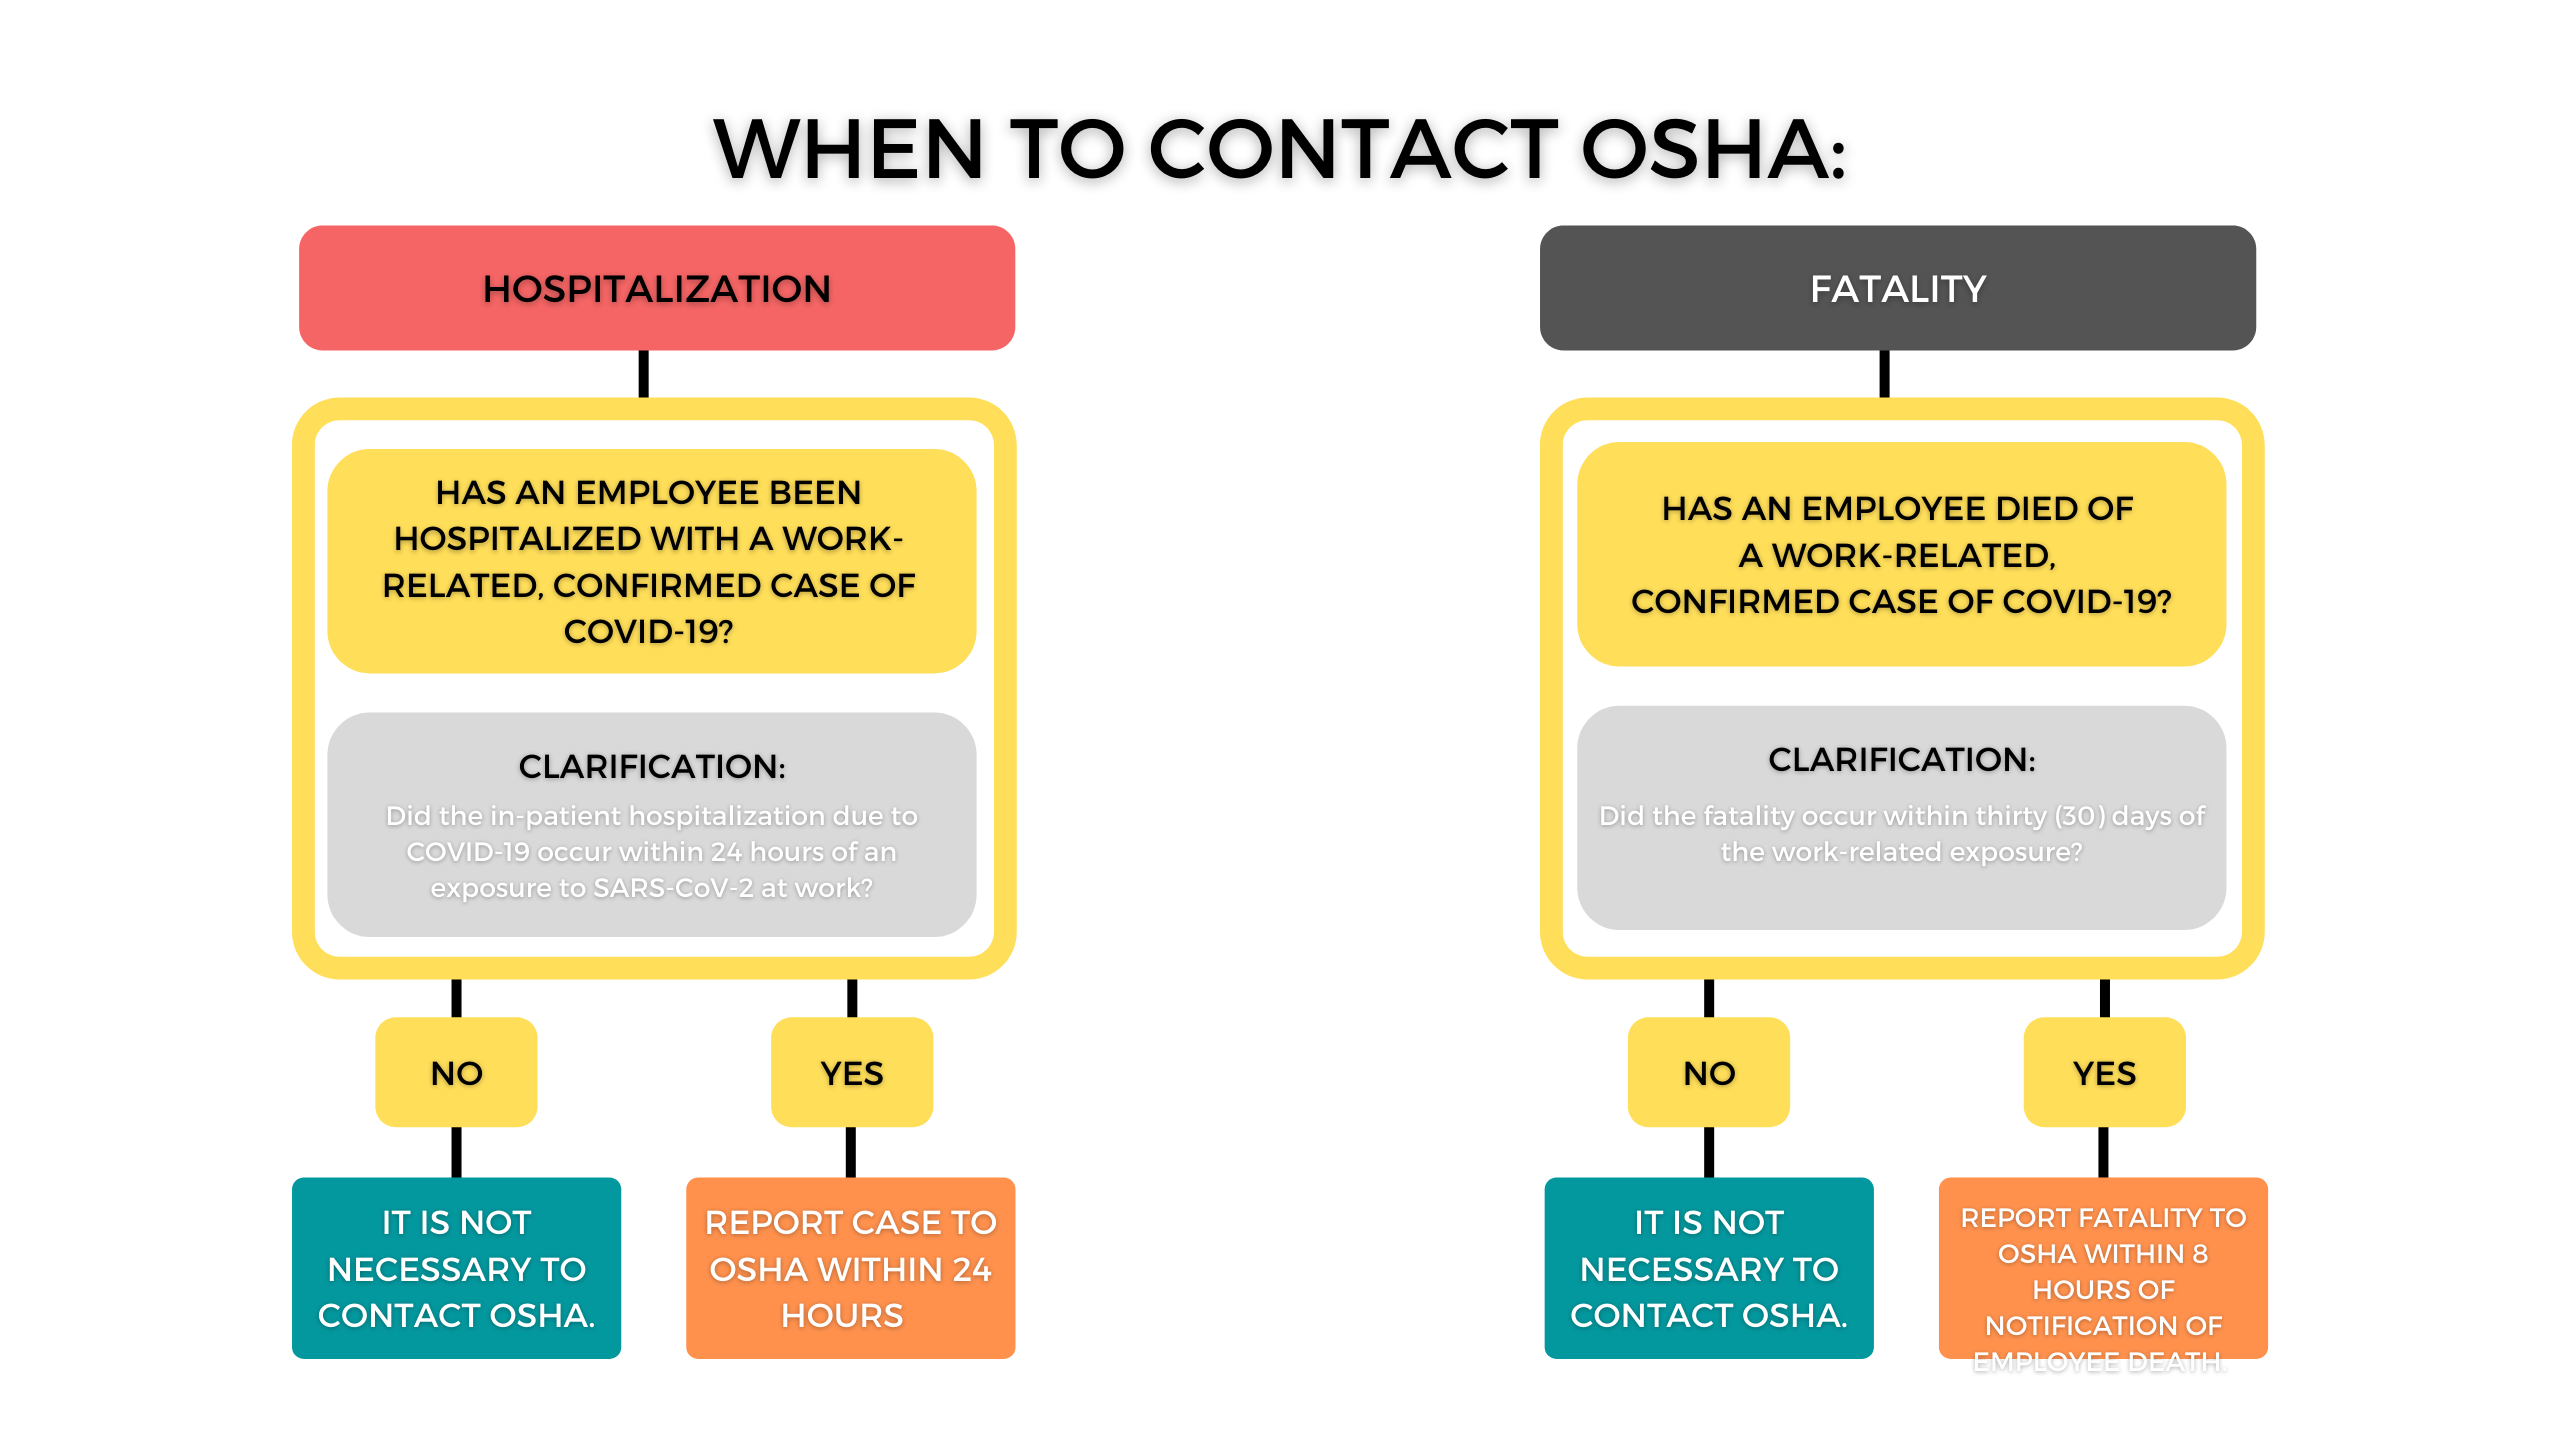 reporting covid-19 hospitalizations and fatalities to osha